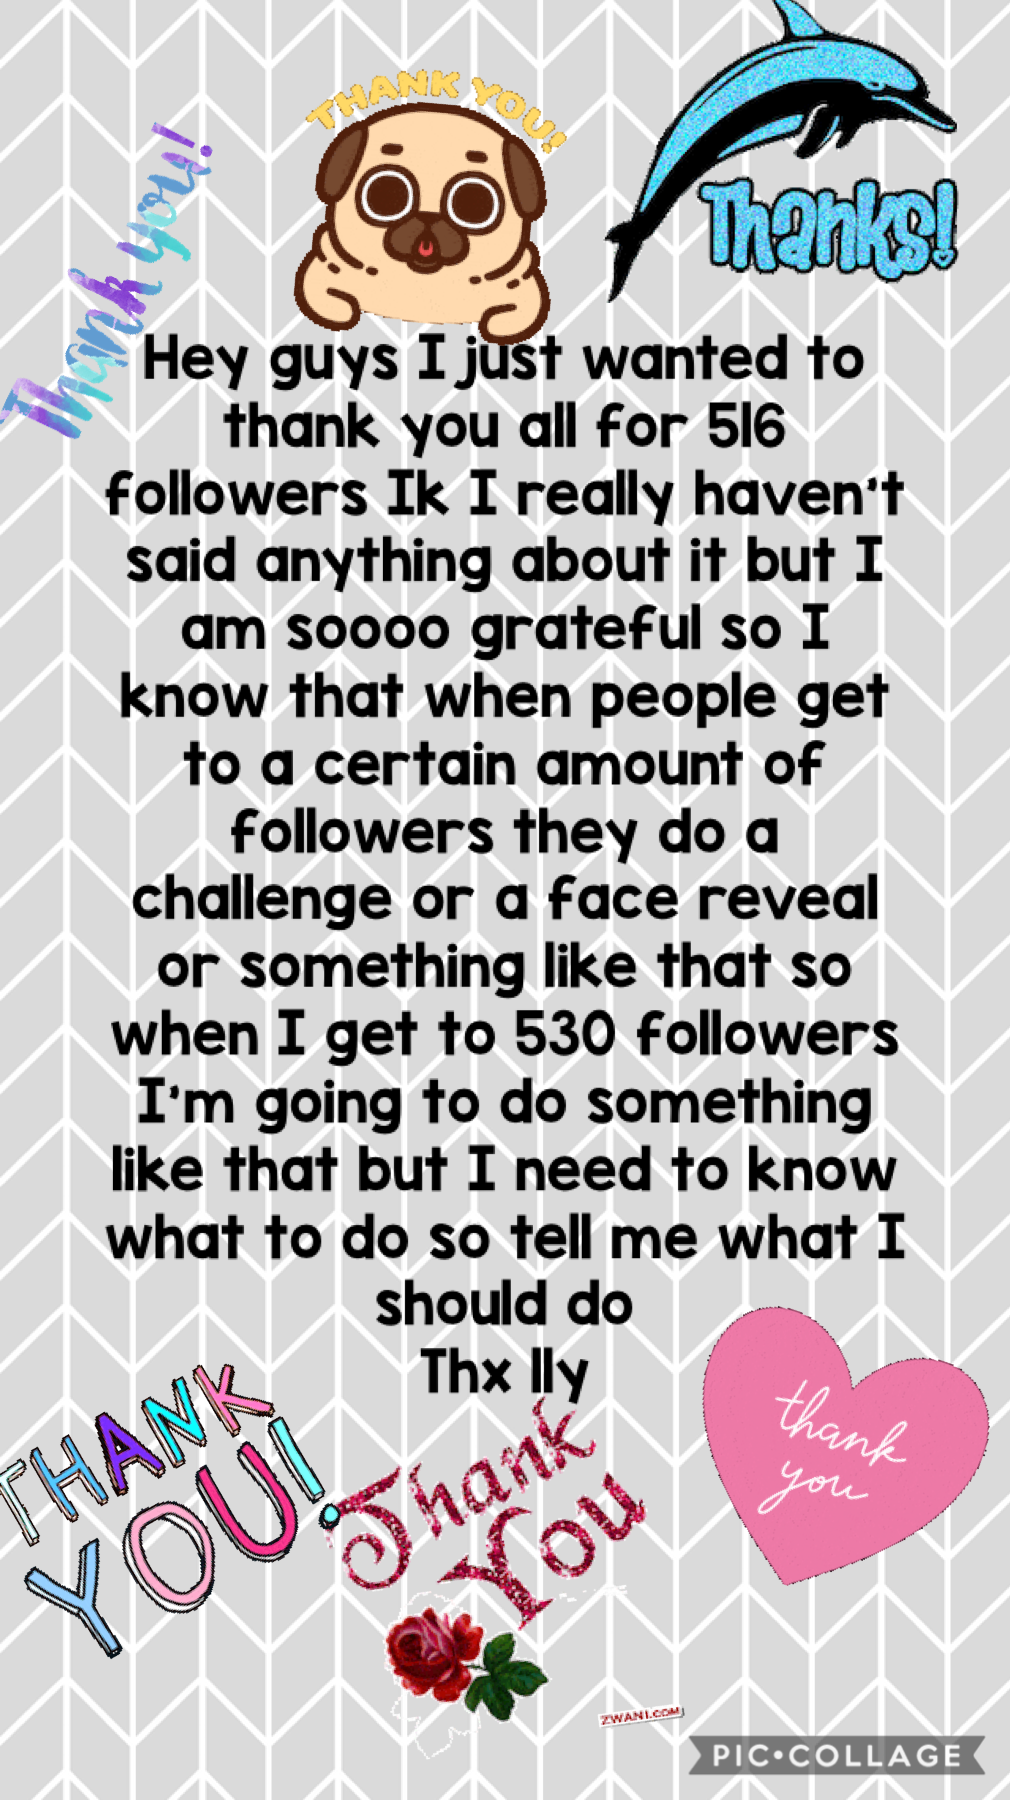 I need ideas on what to do when I get 530 followers thx!